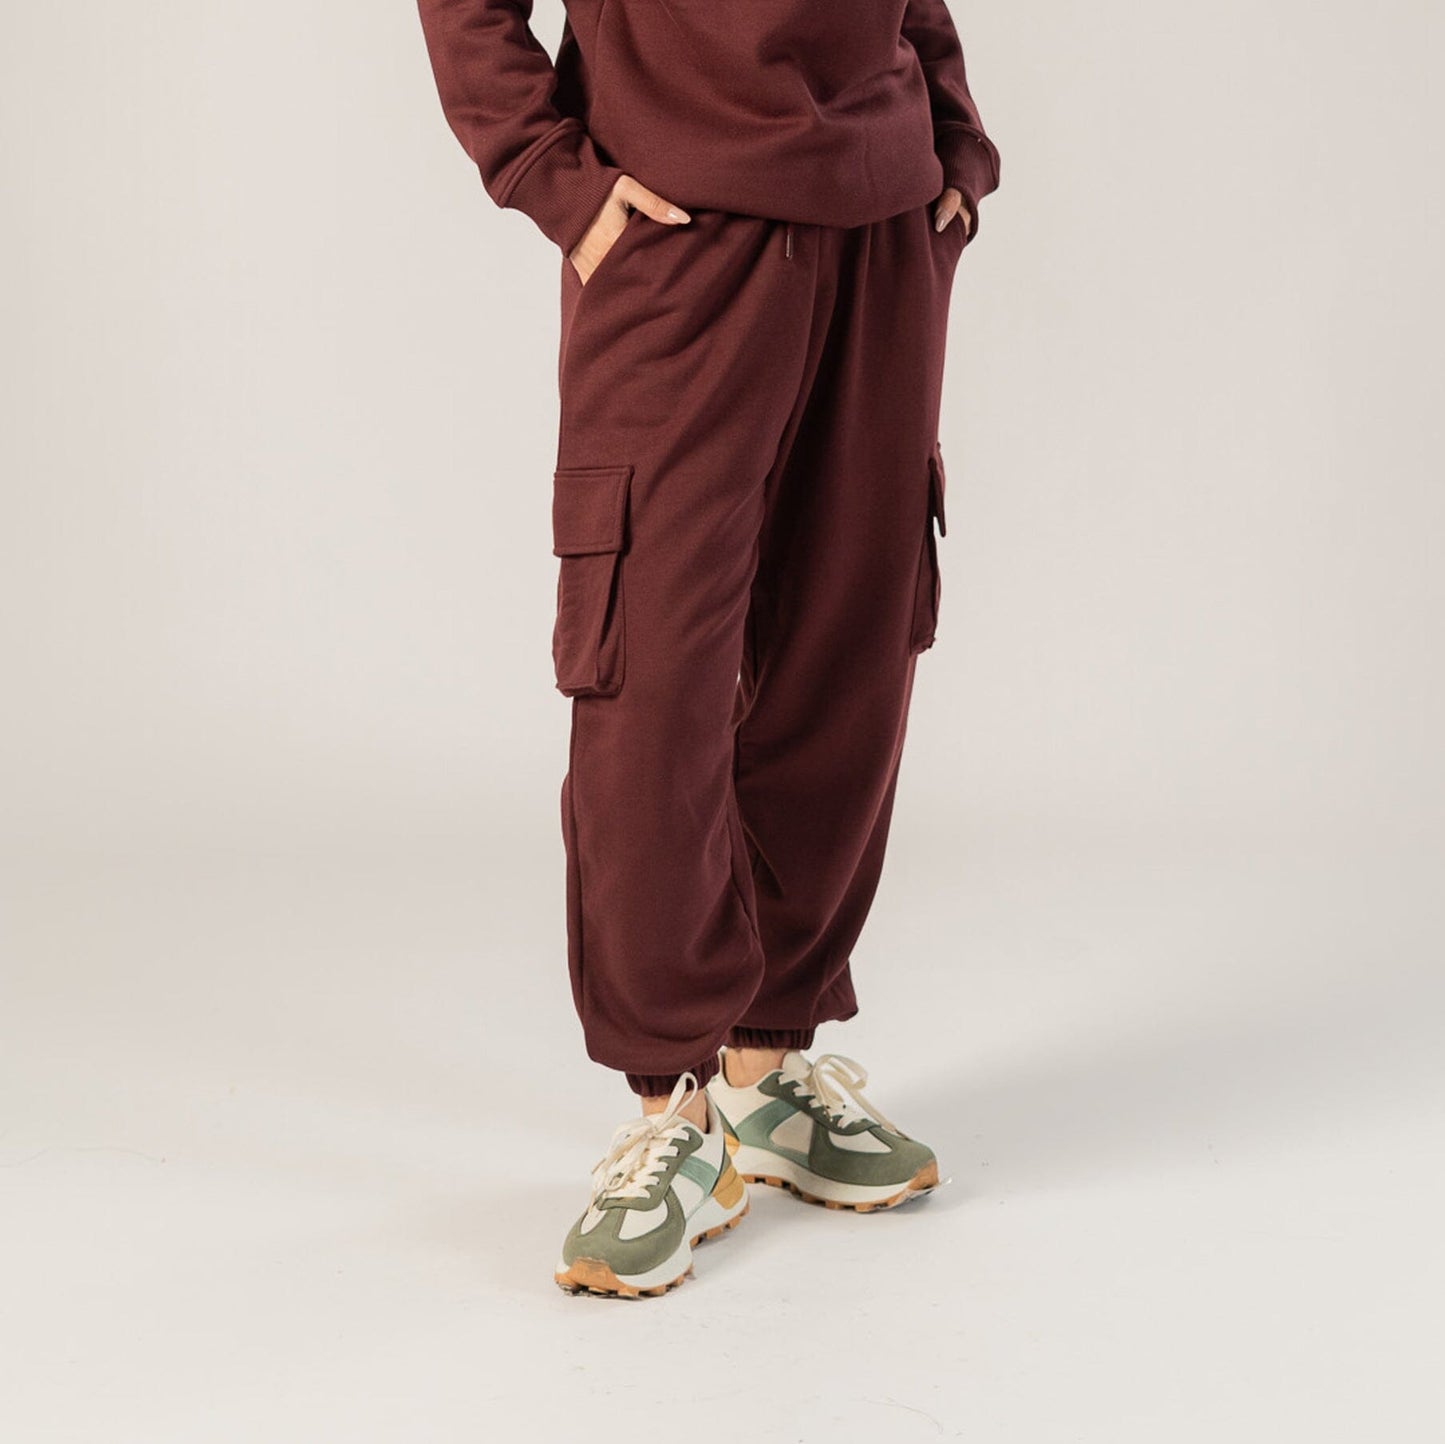 East West women's Terry Jogger Pants Women's Trousers East West Burgundy S 